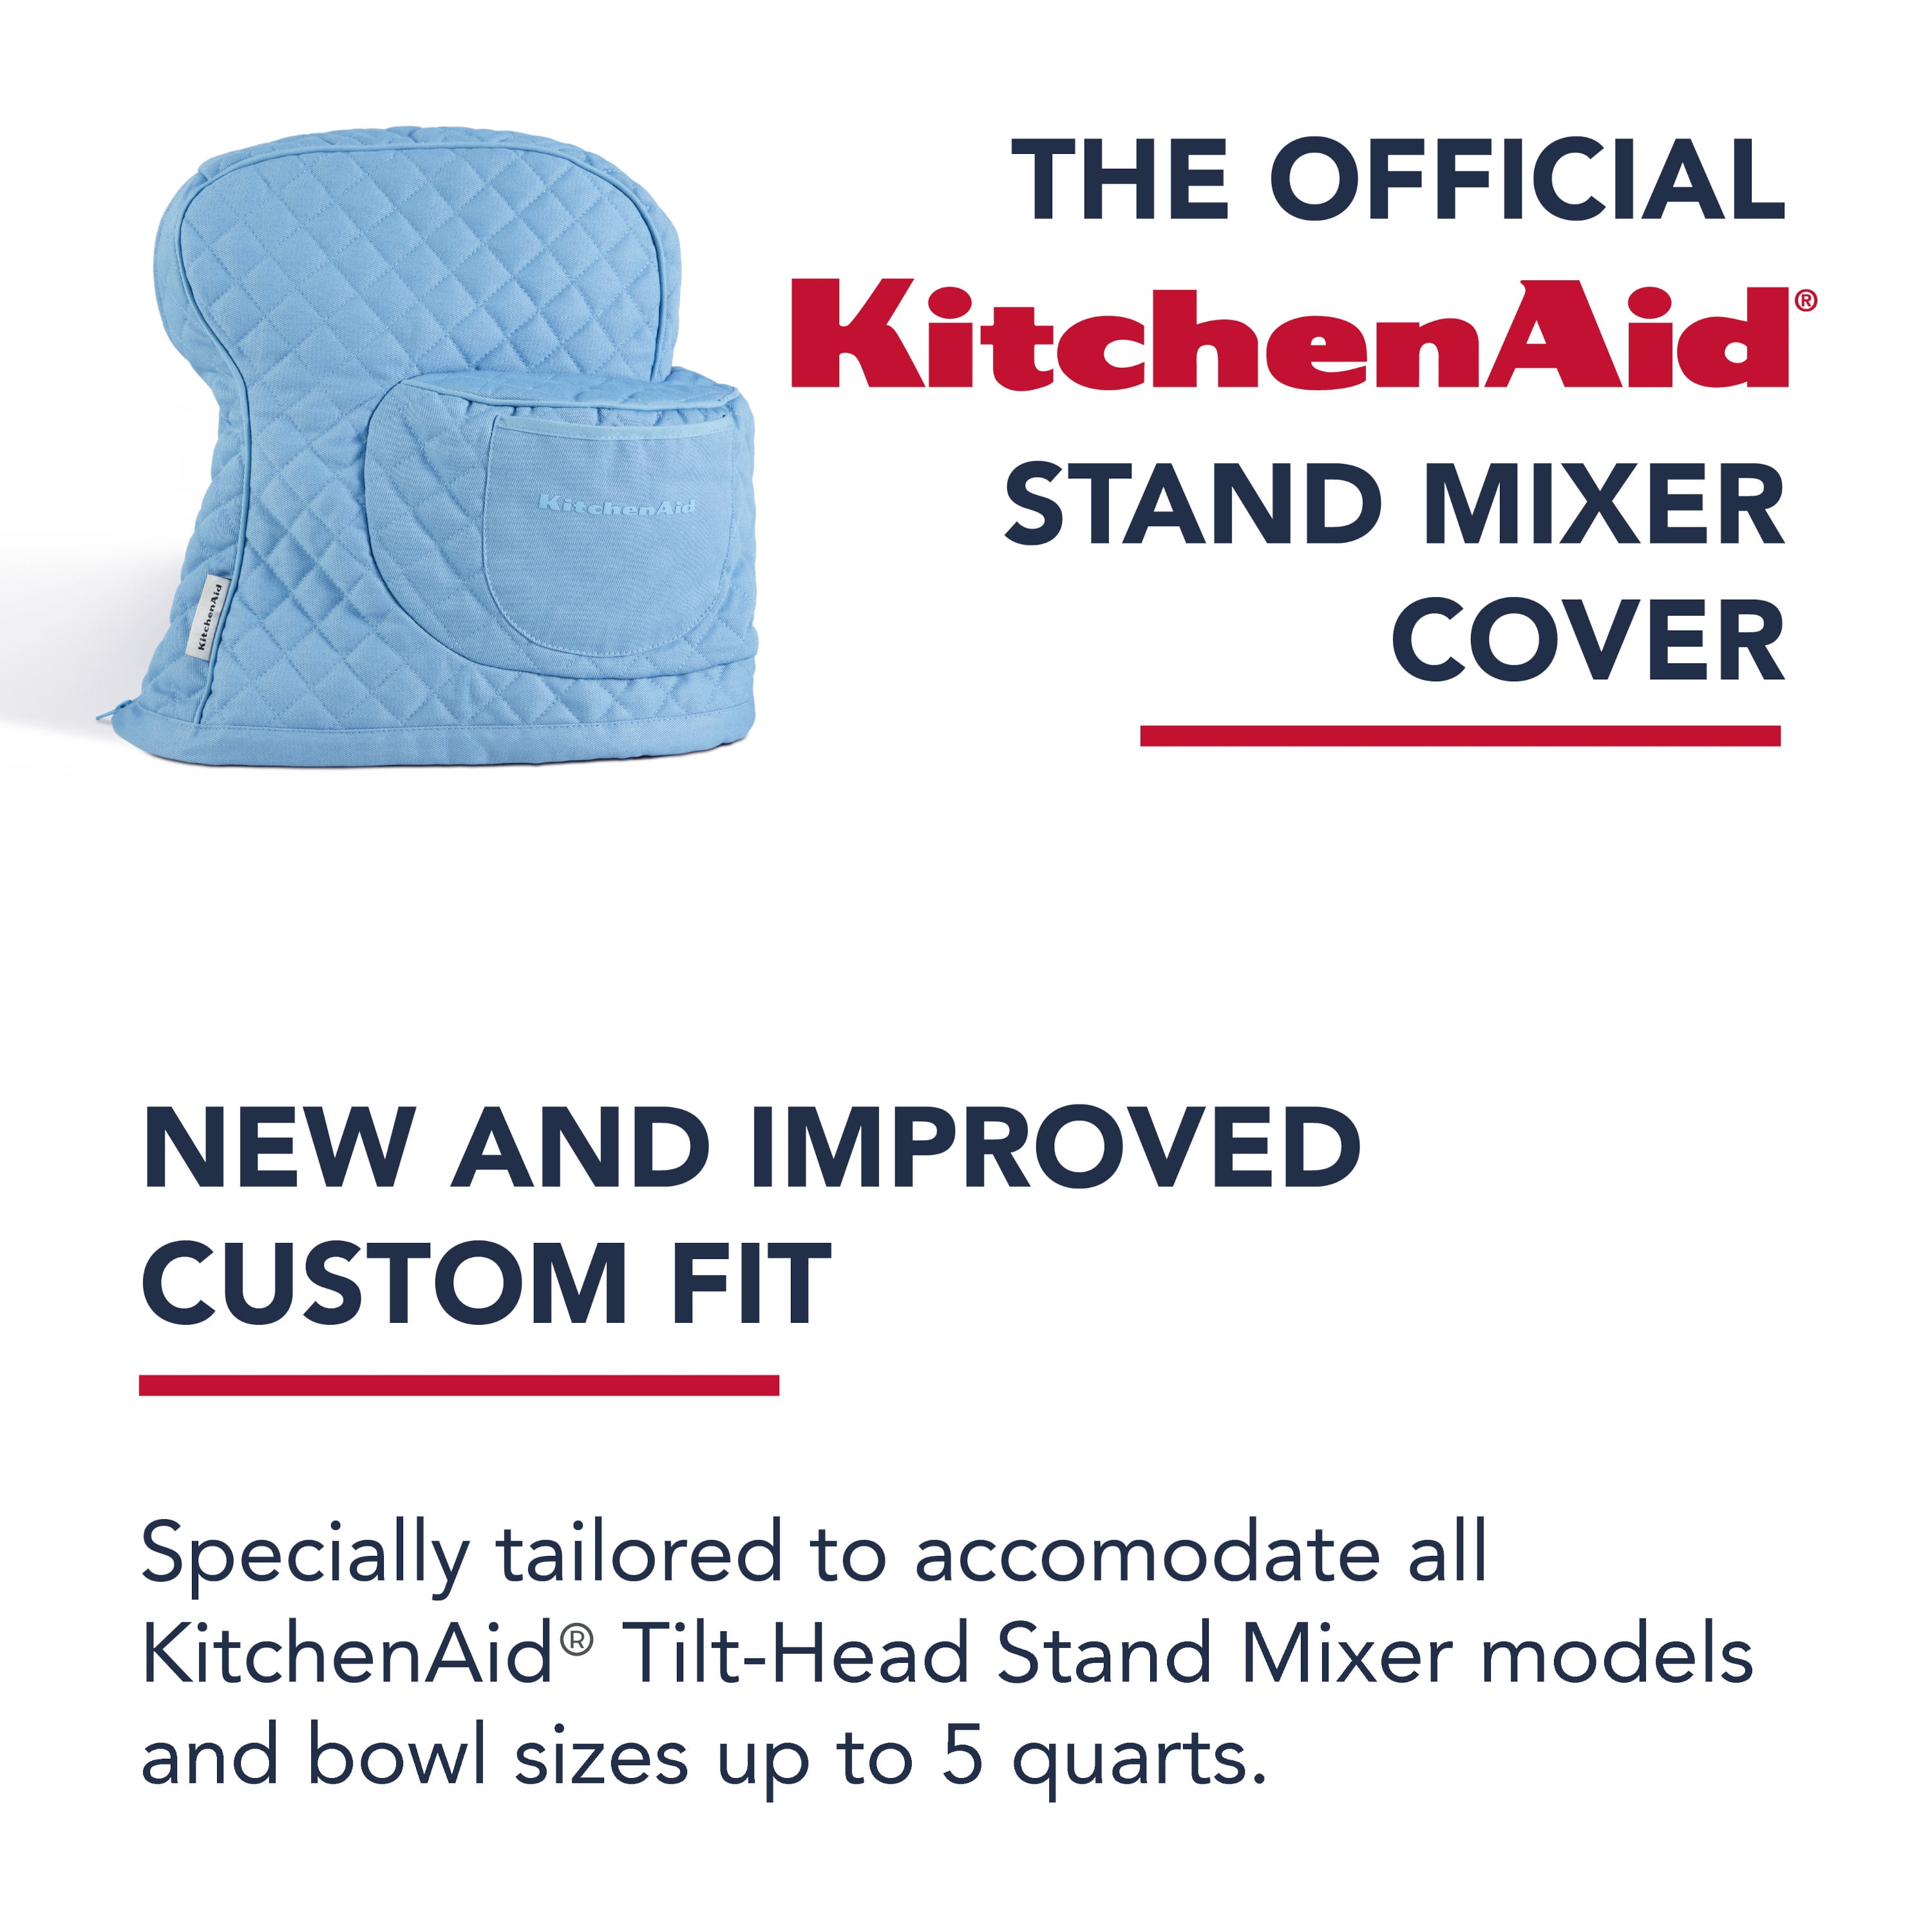 Kitchen Aid Mixer Cover,Kitchen Aid Mixer Accessories with Pockets,Stand Mixer Quilted Dust Cover Compatible with KitchenAid 4.5-5 & 5-8 Quart.Stand